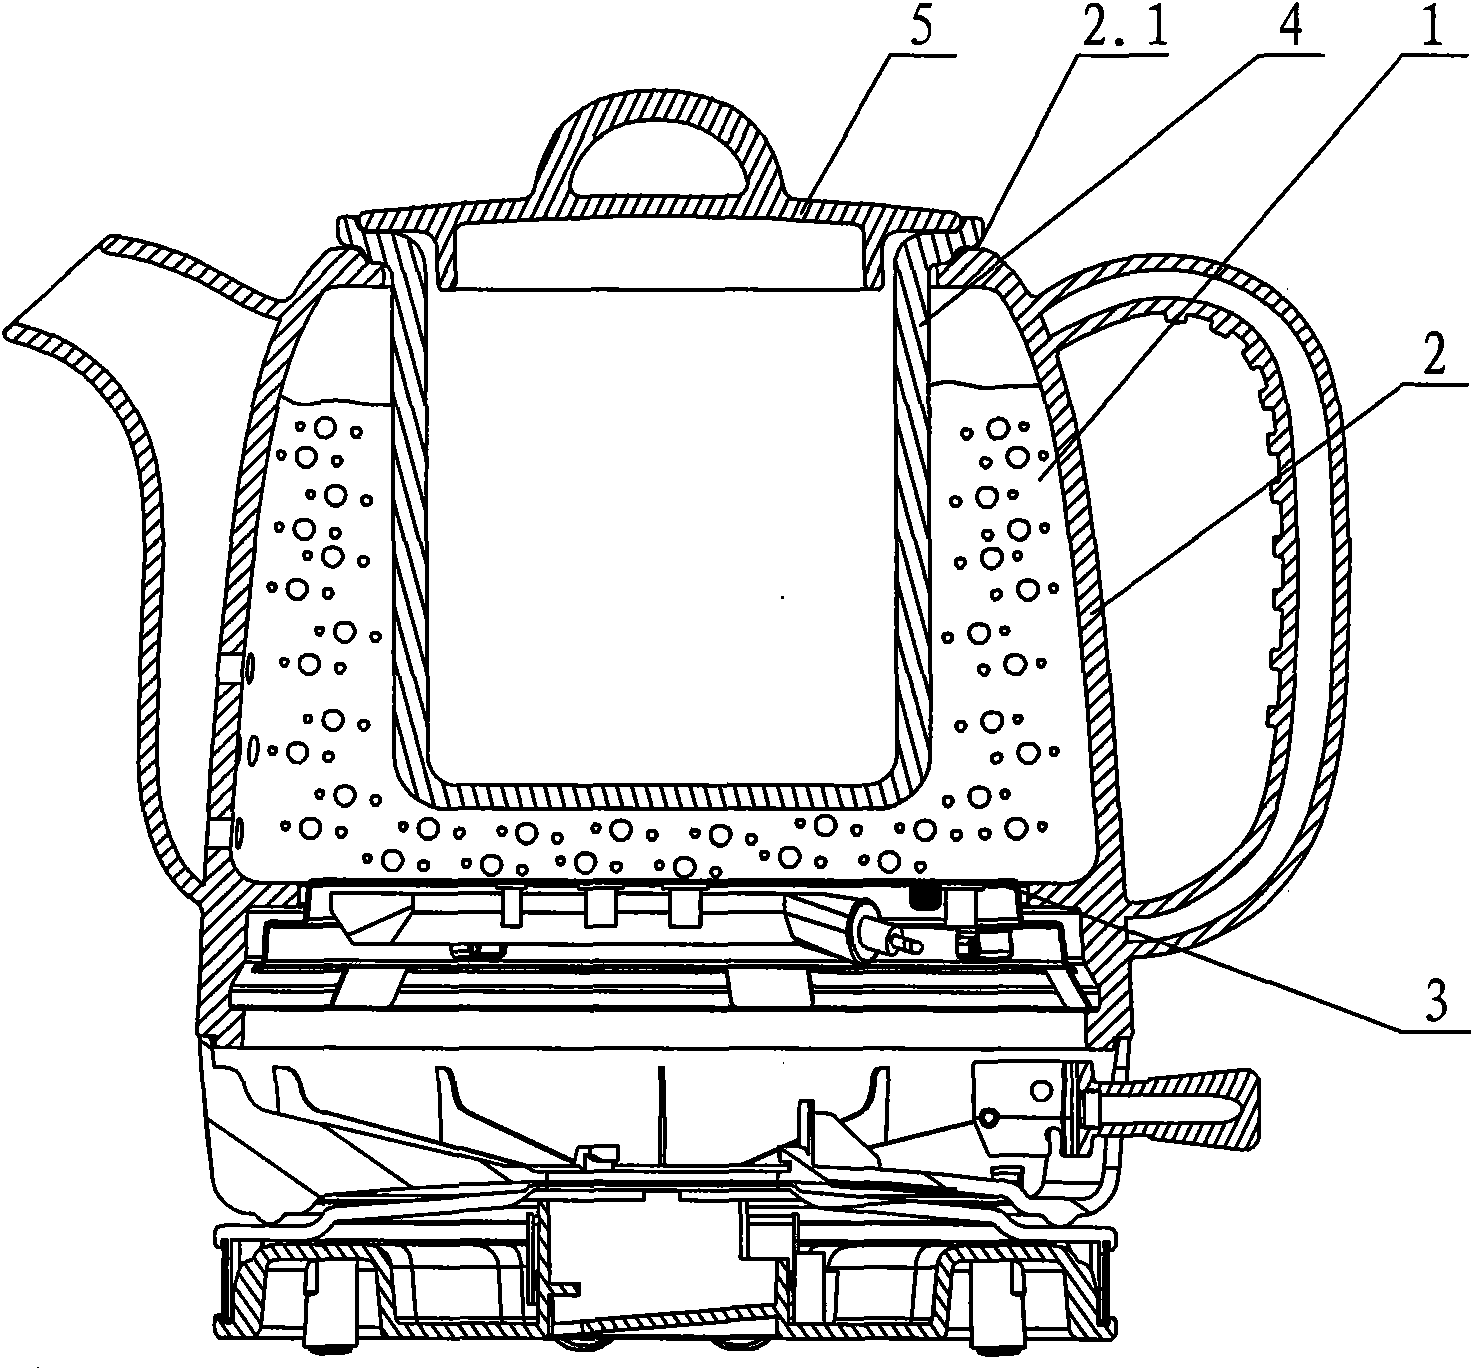 Inner-tank heating structure of electric kettle